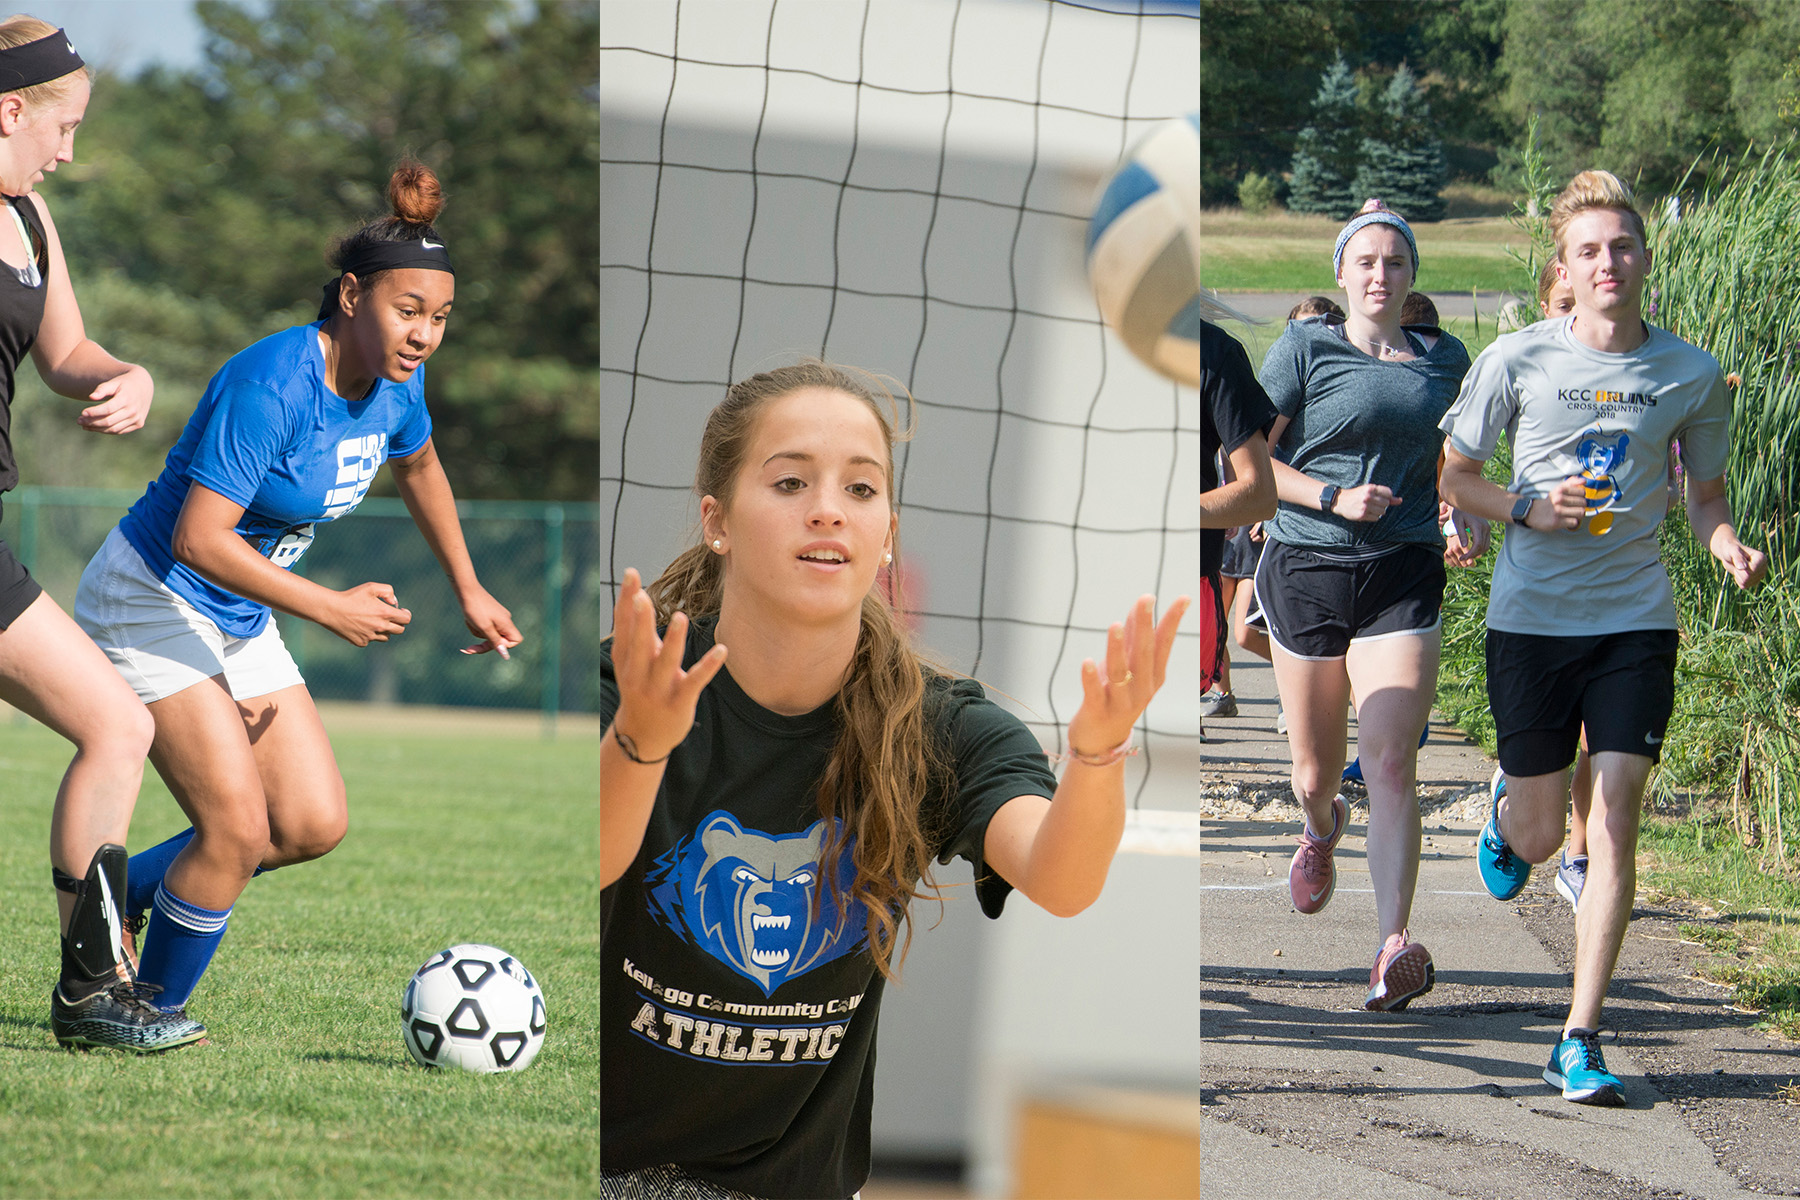 A collage of sports photos including women's soccer and women's volleyball players and cross country runners.